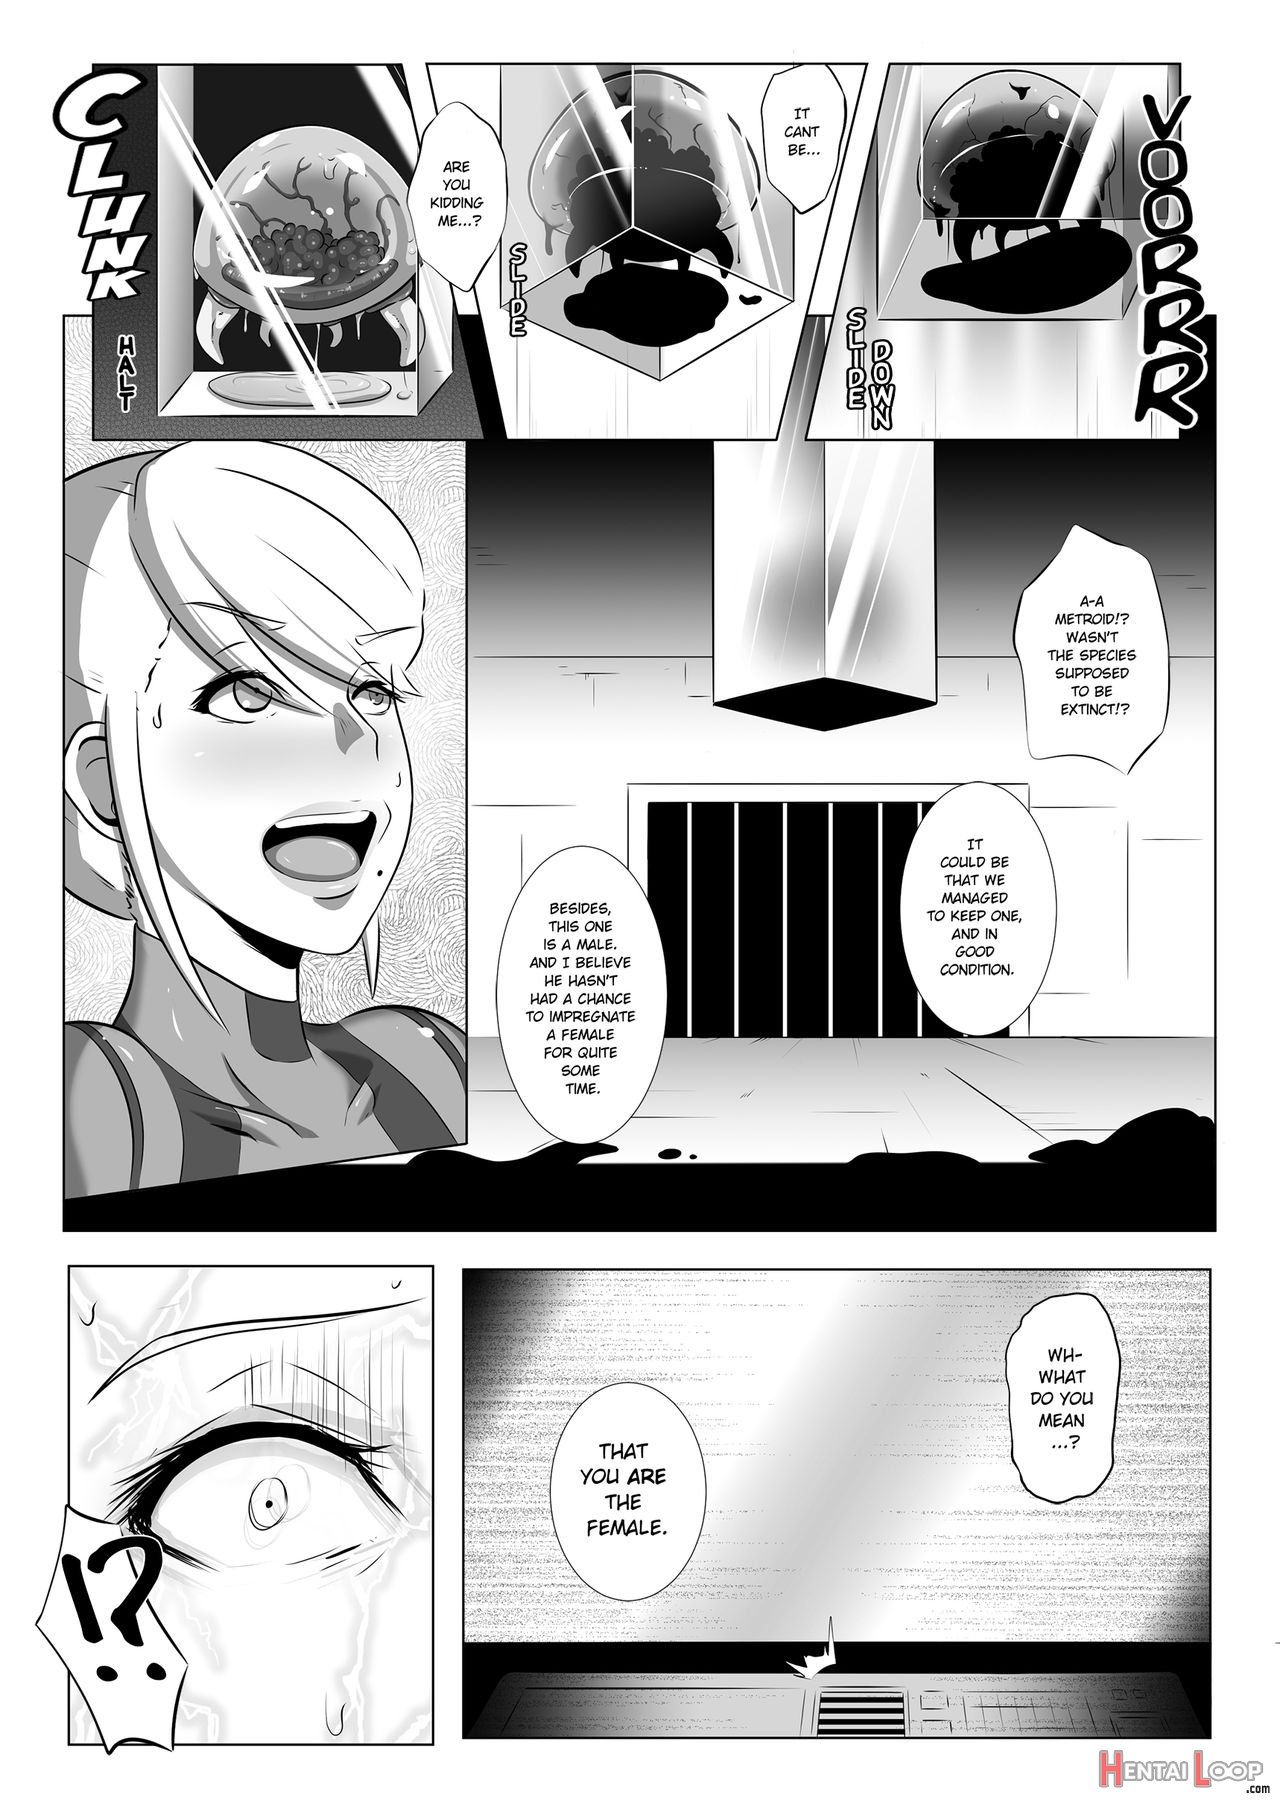 Mission X Fusion page 8